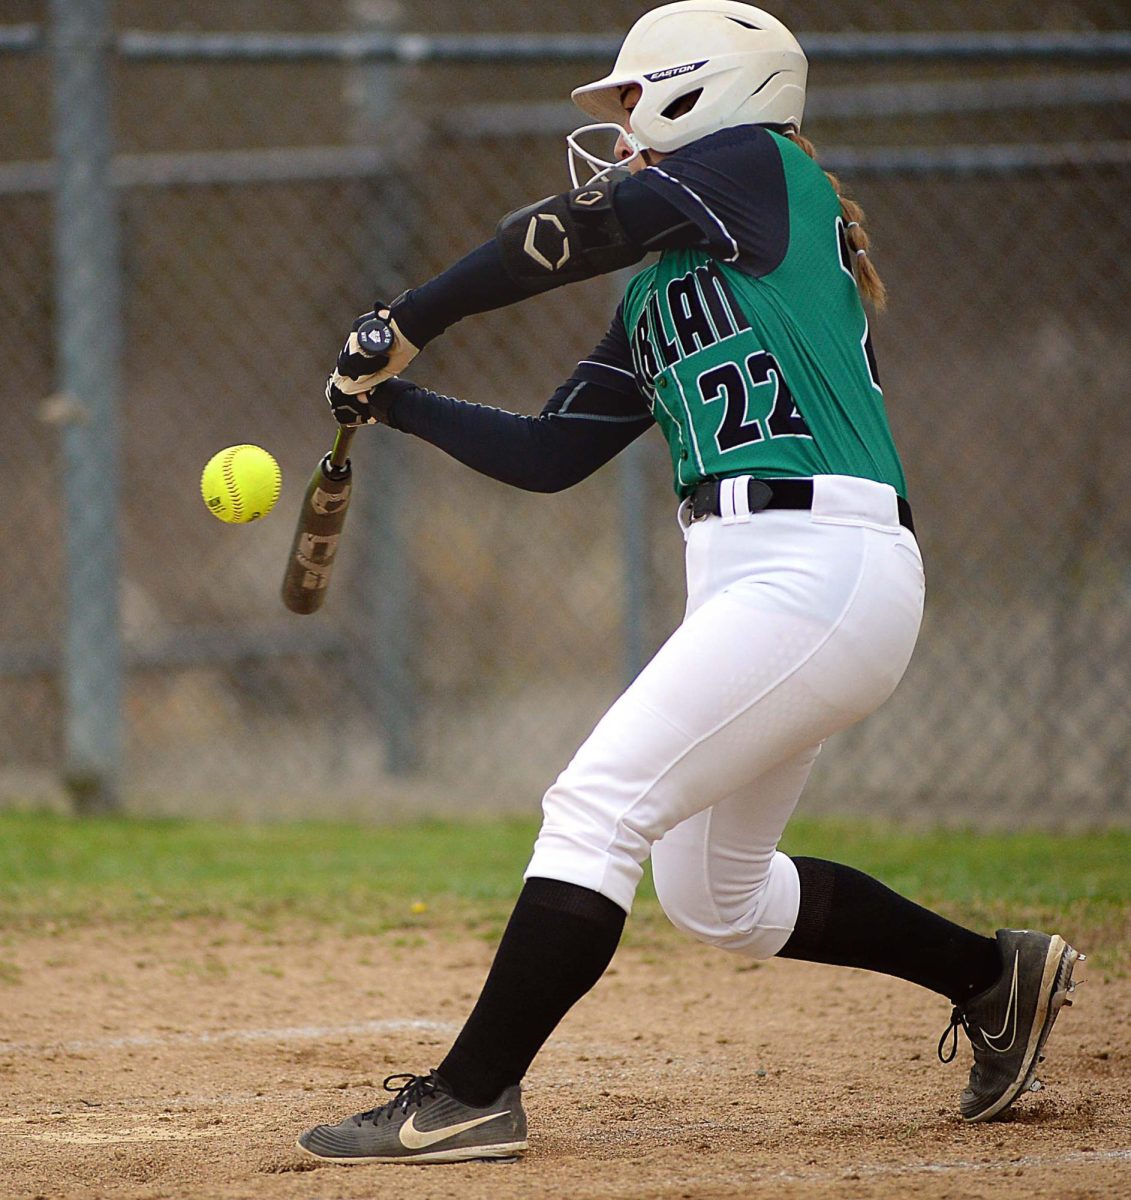 Junior third baseman Ella Lisenbee pounded out two triples as Harlan fell 12-4 at Claiborne, Tenn., on Tuesday.